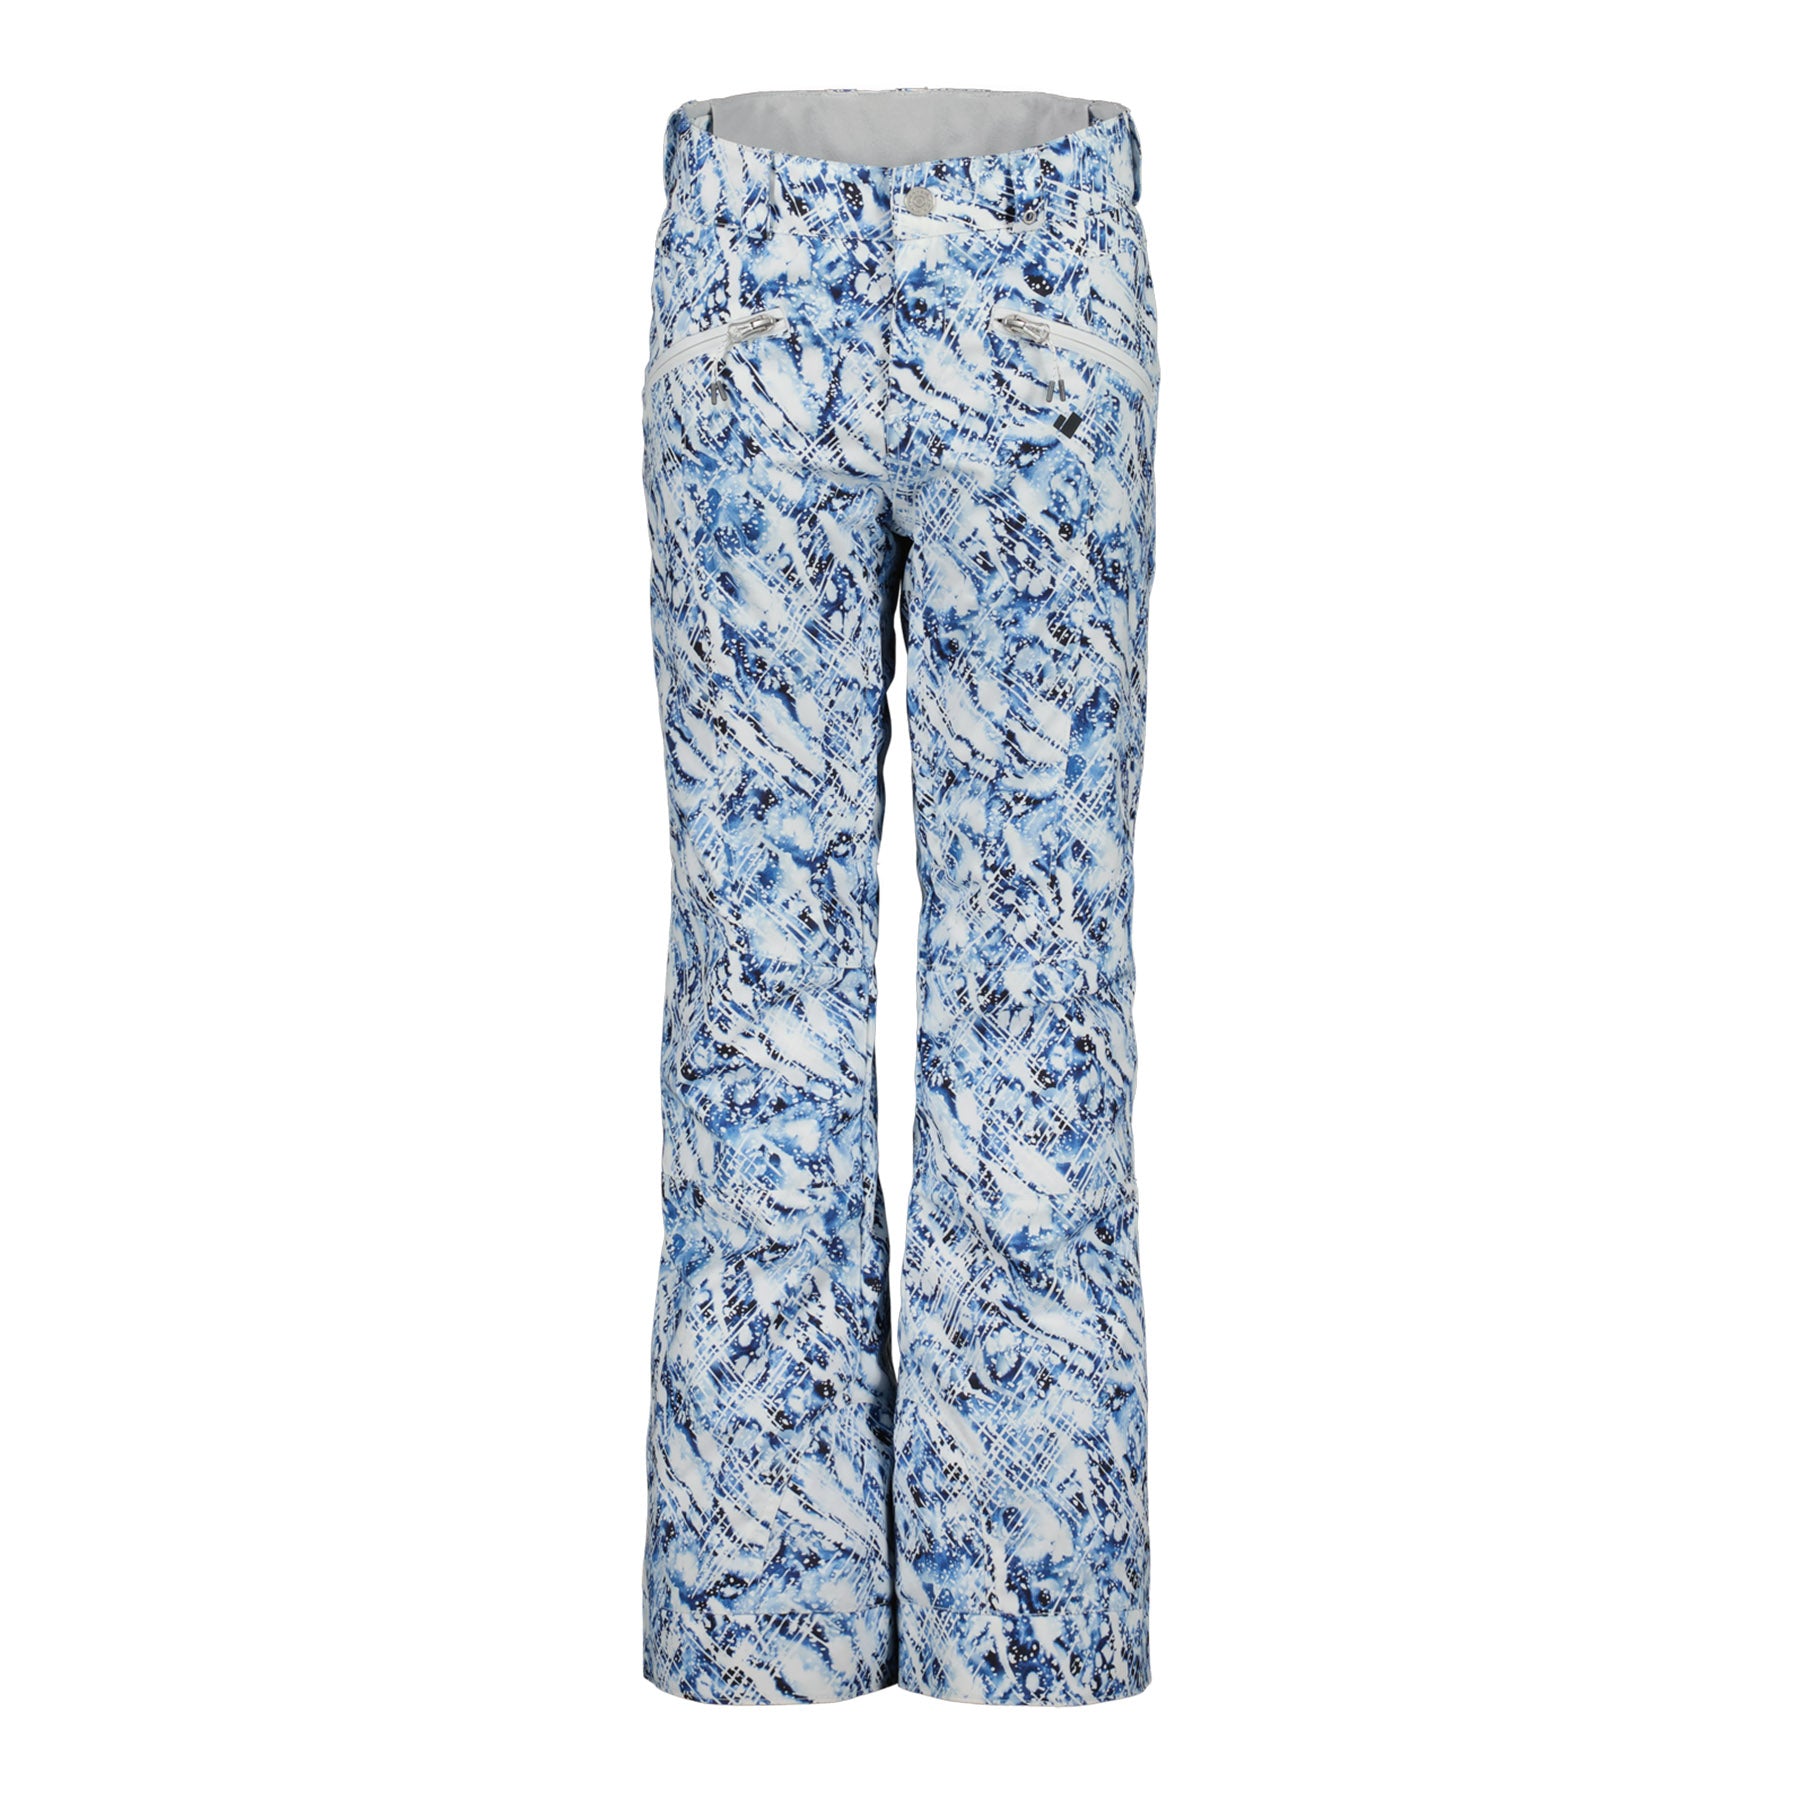 Hero image featuring the front of the Obermeyer Jessi Print Pants in verglas light blue and white.